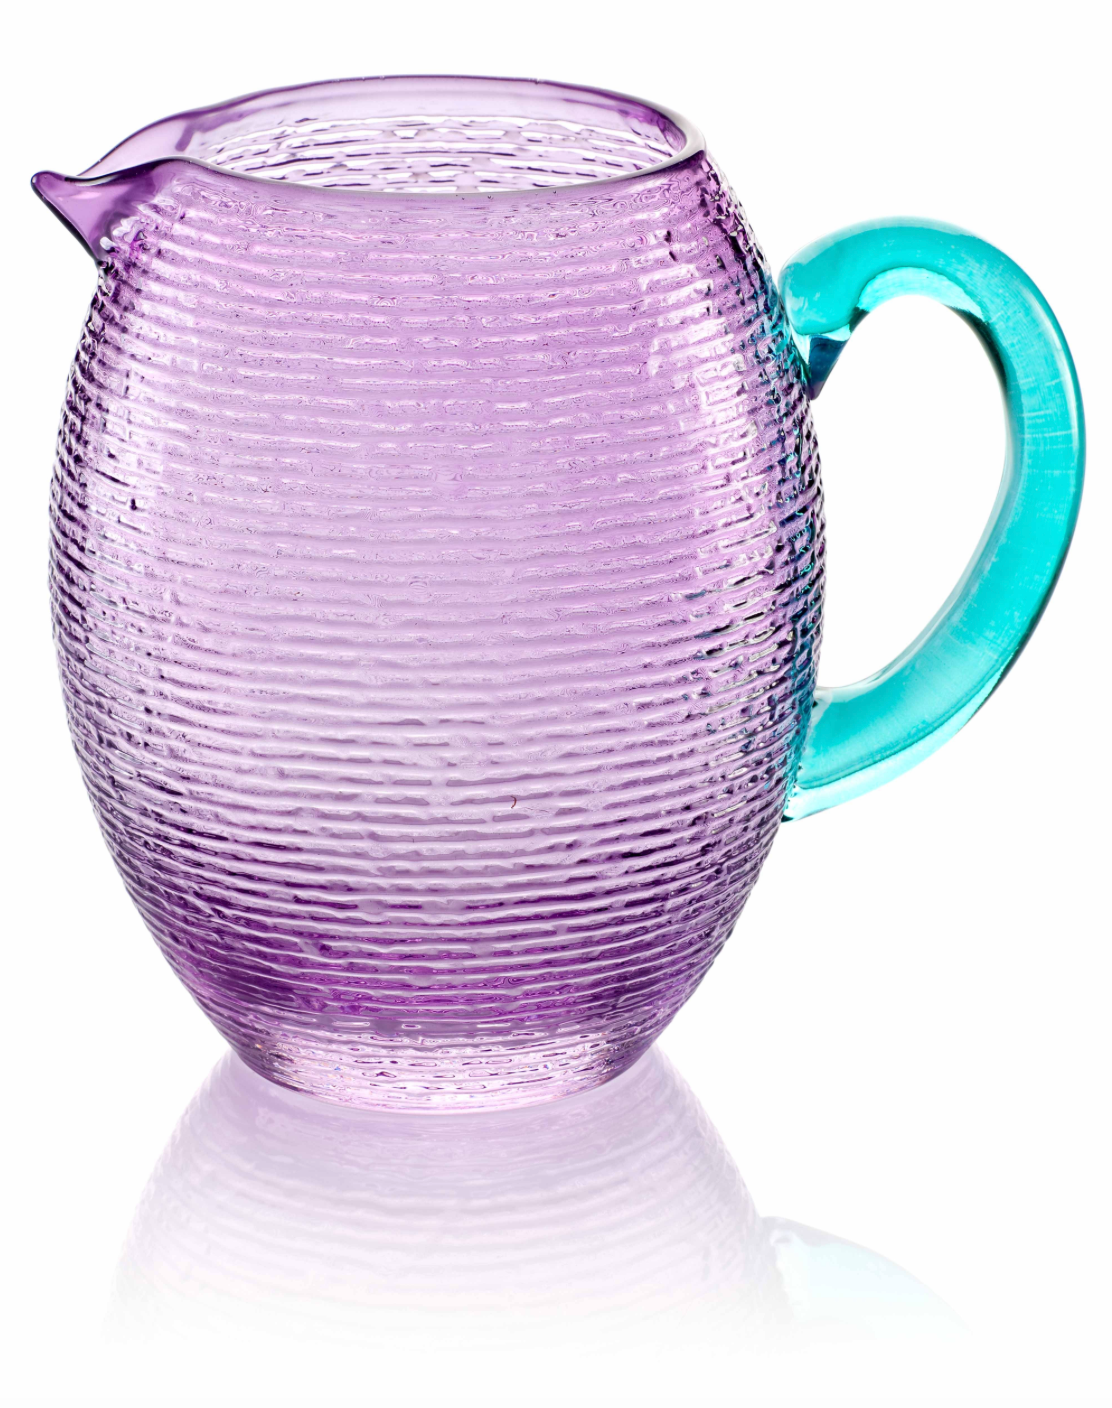 IVV Multicolor 1.5L Pitcher Amethyst with Turquoise Handle